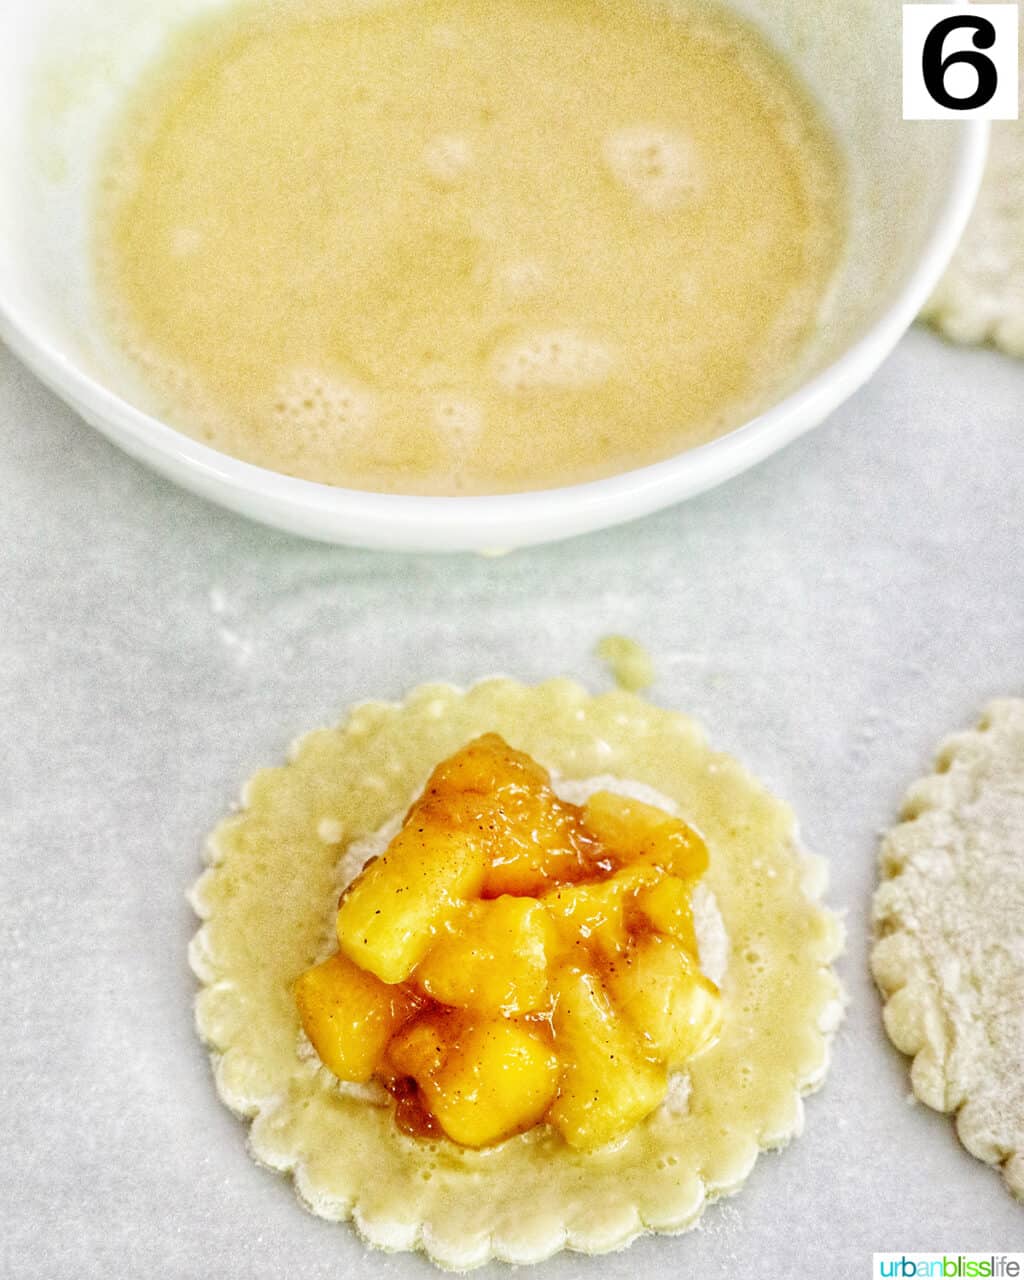 egg wash in a bowl above a puff pastry round with diced peaches and mangoes on top.